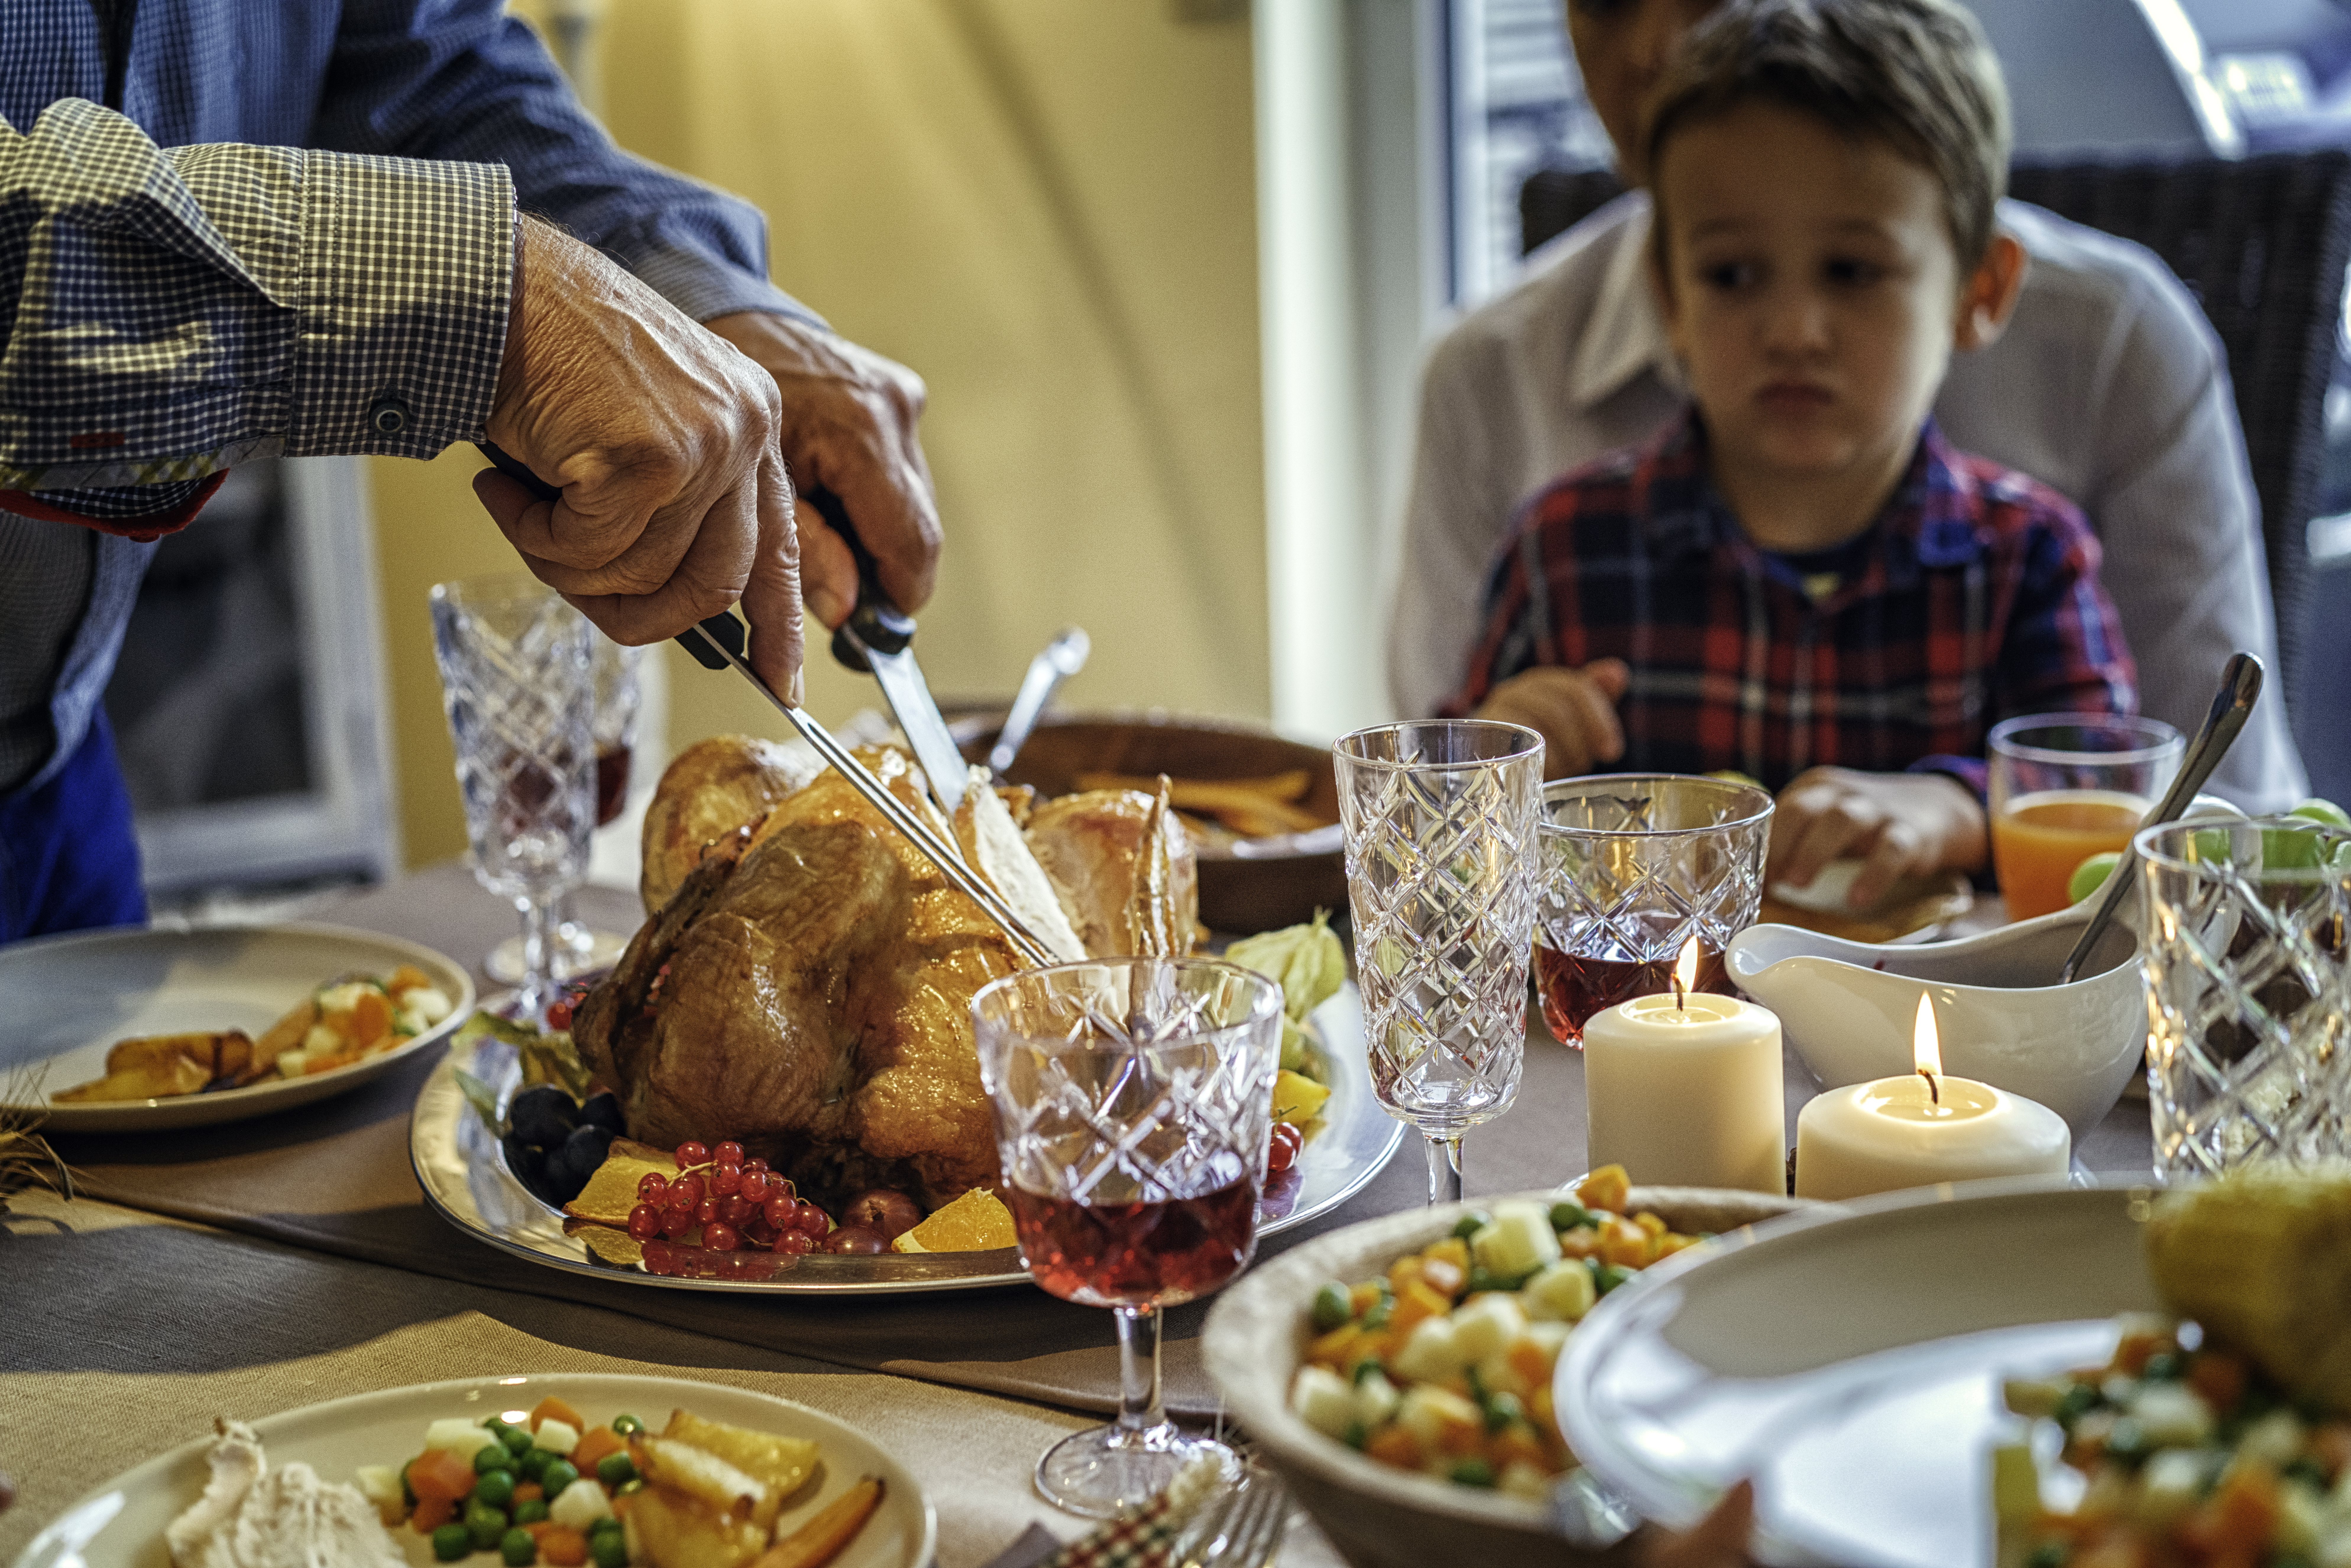 Grandfather carving stuffed turkey for holiday dinner with his family. The Thanksgiving Dinner is served with roasted potatoes, cranberry sauce, vegetables and red berry jelly.